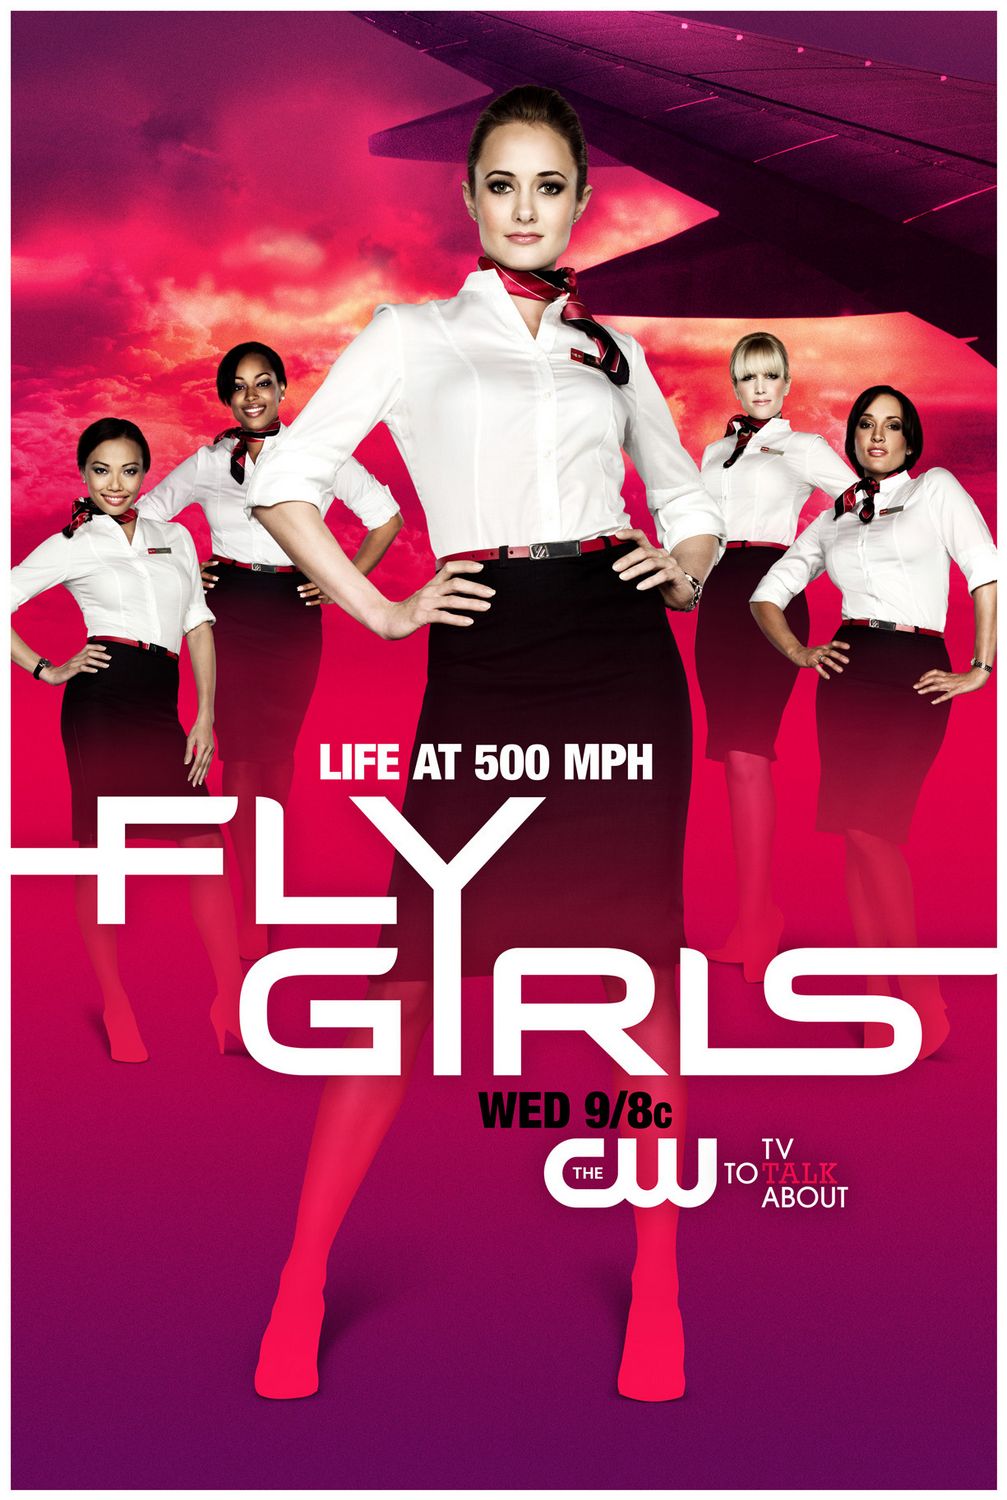 Extra Large TV Poster Image for Fly Girls 